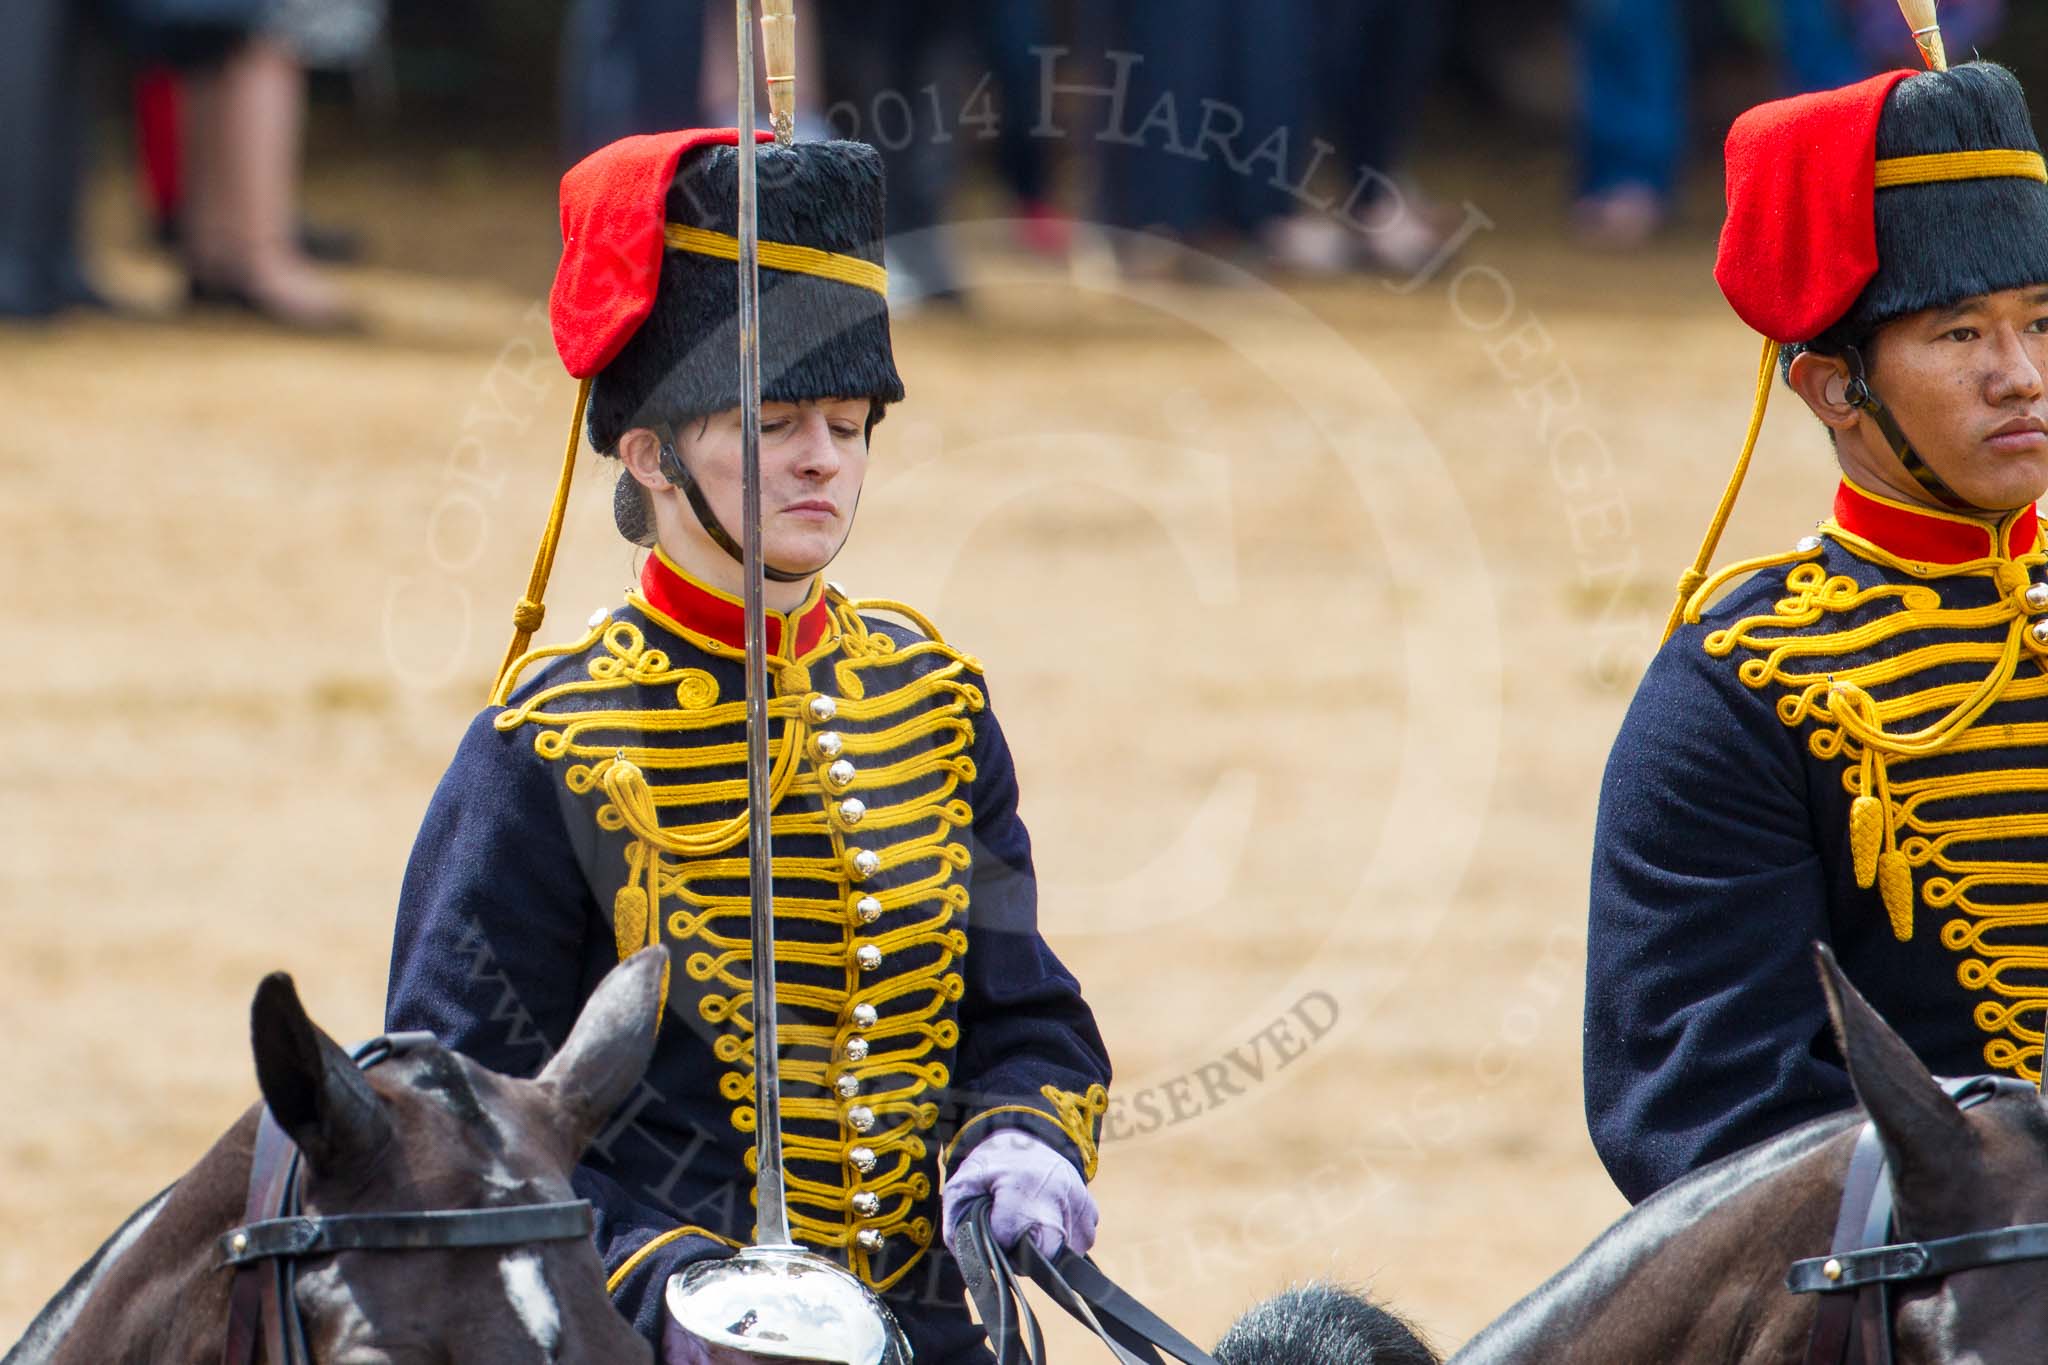 The Colonel's Review 2014.
Horse Guards Parade, Westminster,
London,

United Kingdom,
on 07 June 2014 at 11:57, image #667